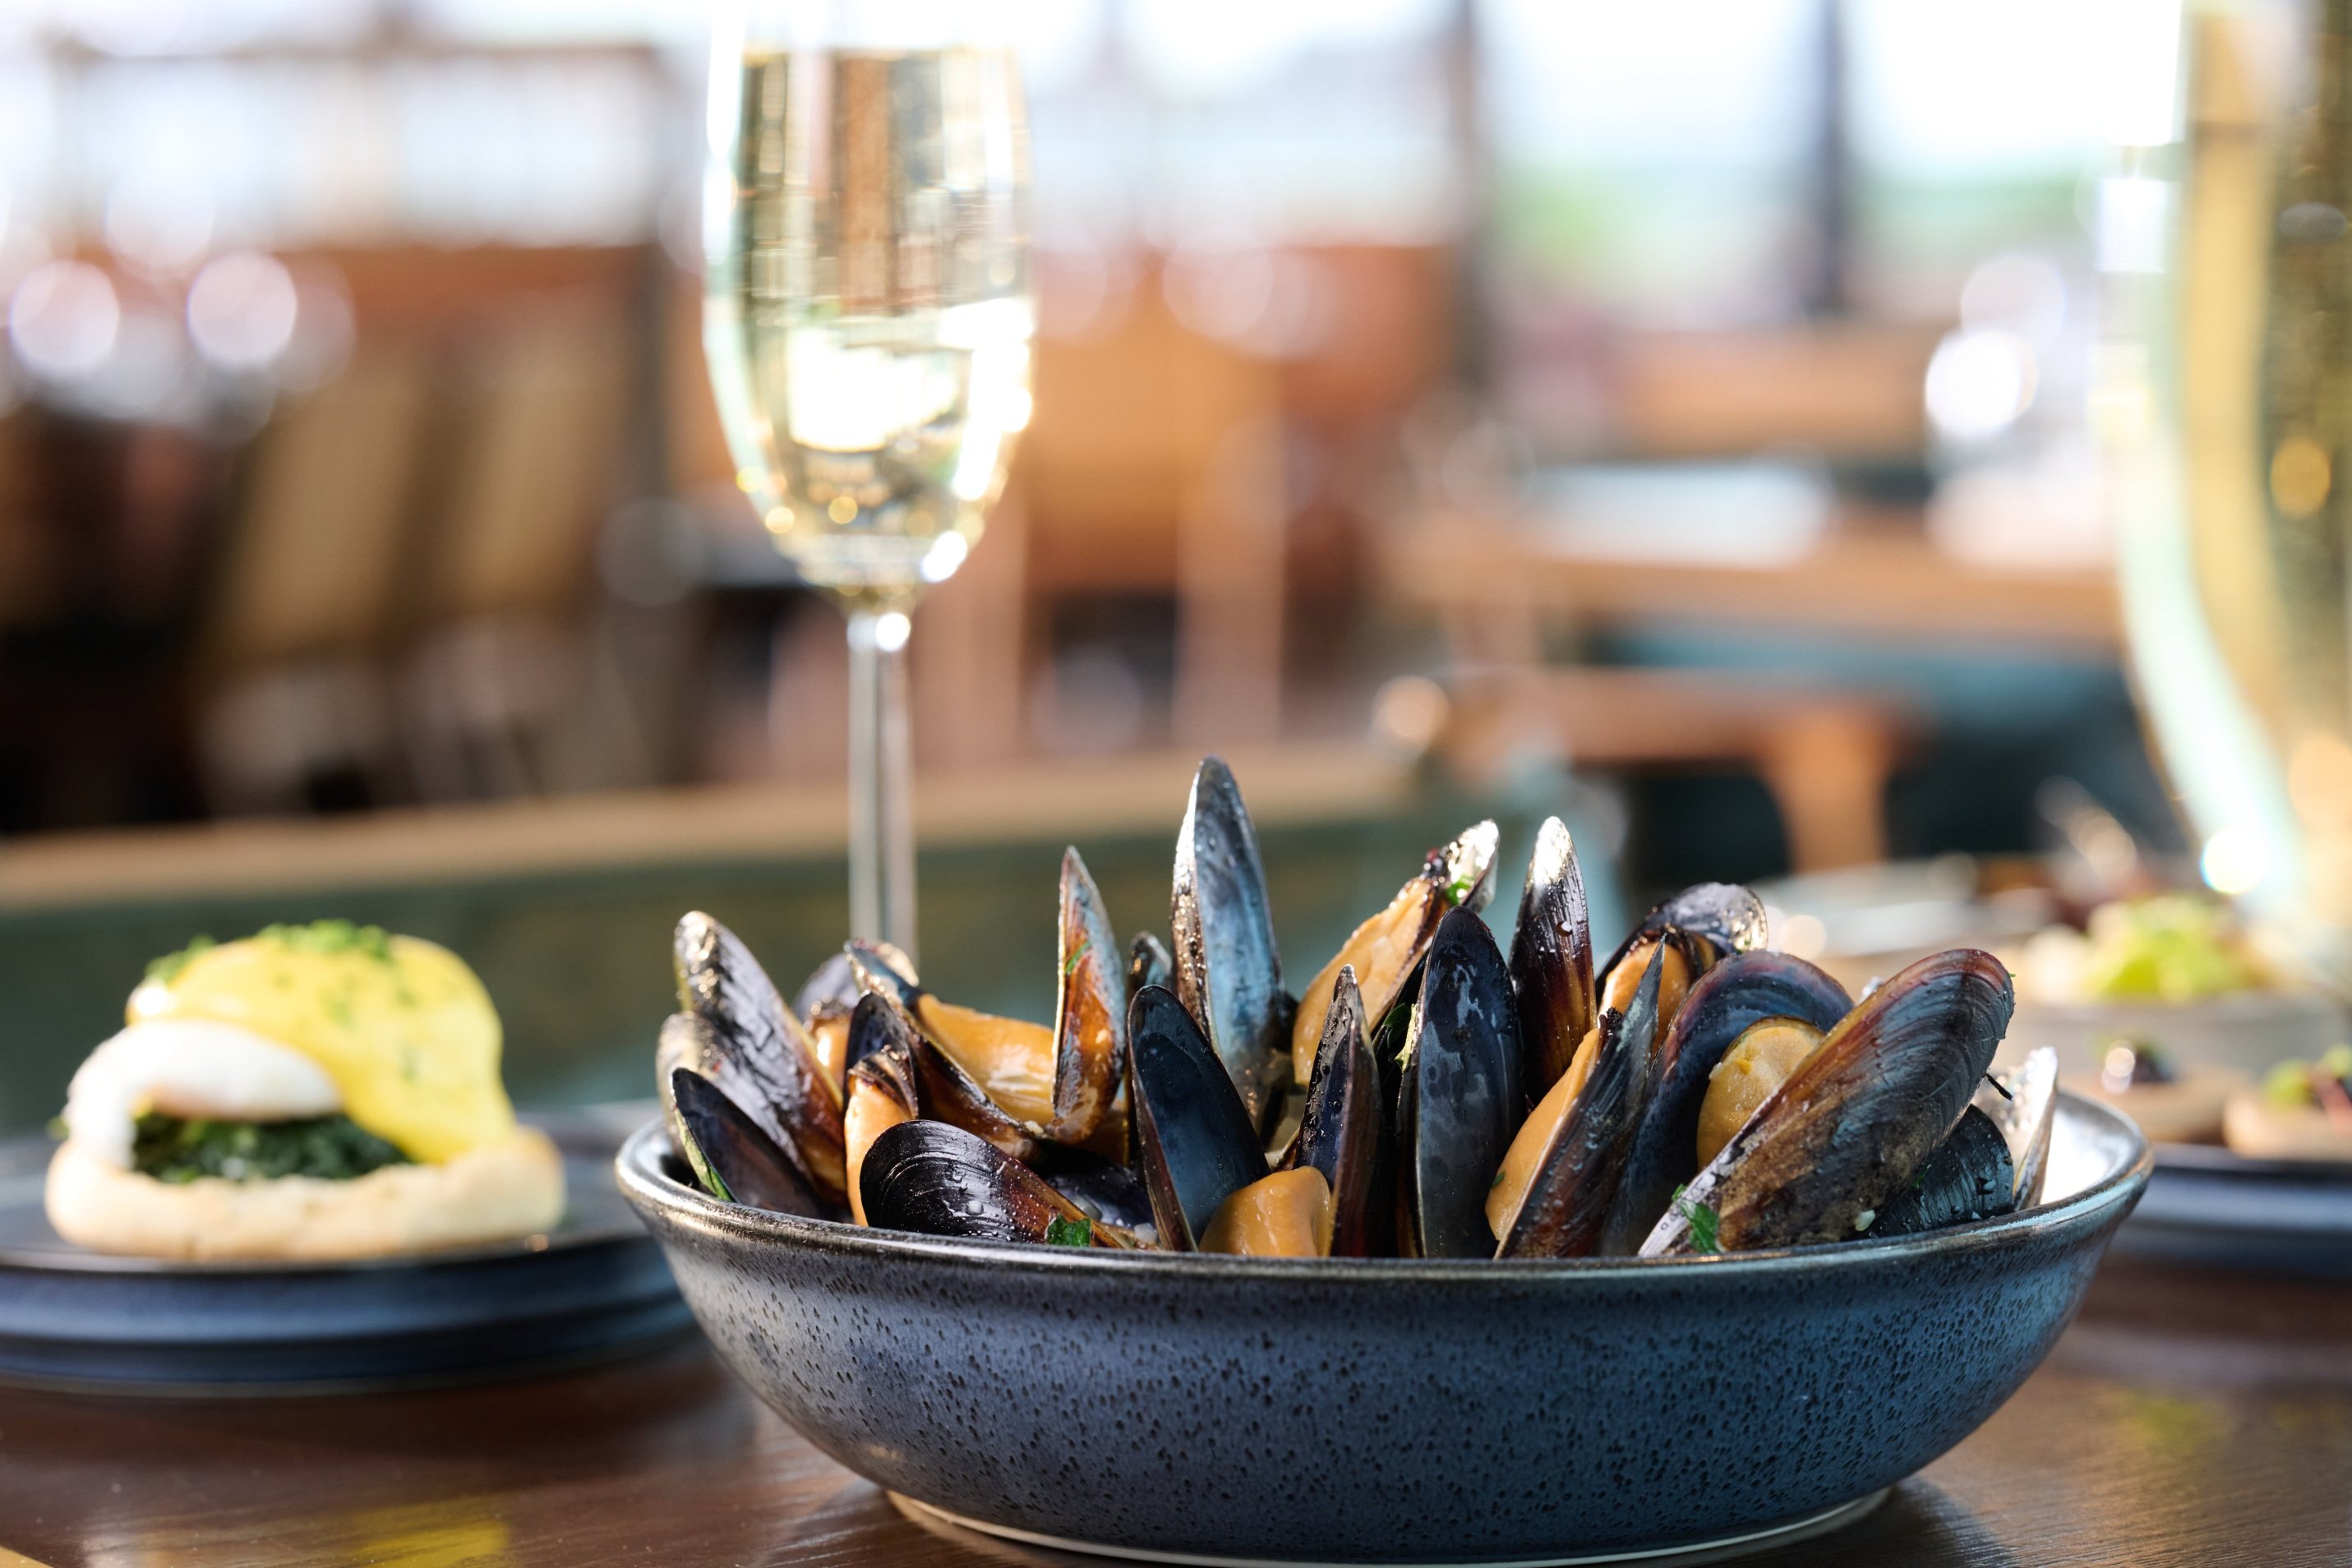 Moules mariniere at the Sunset Grill. Photo: The Sunset Grill